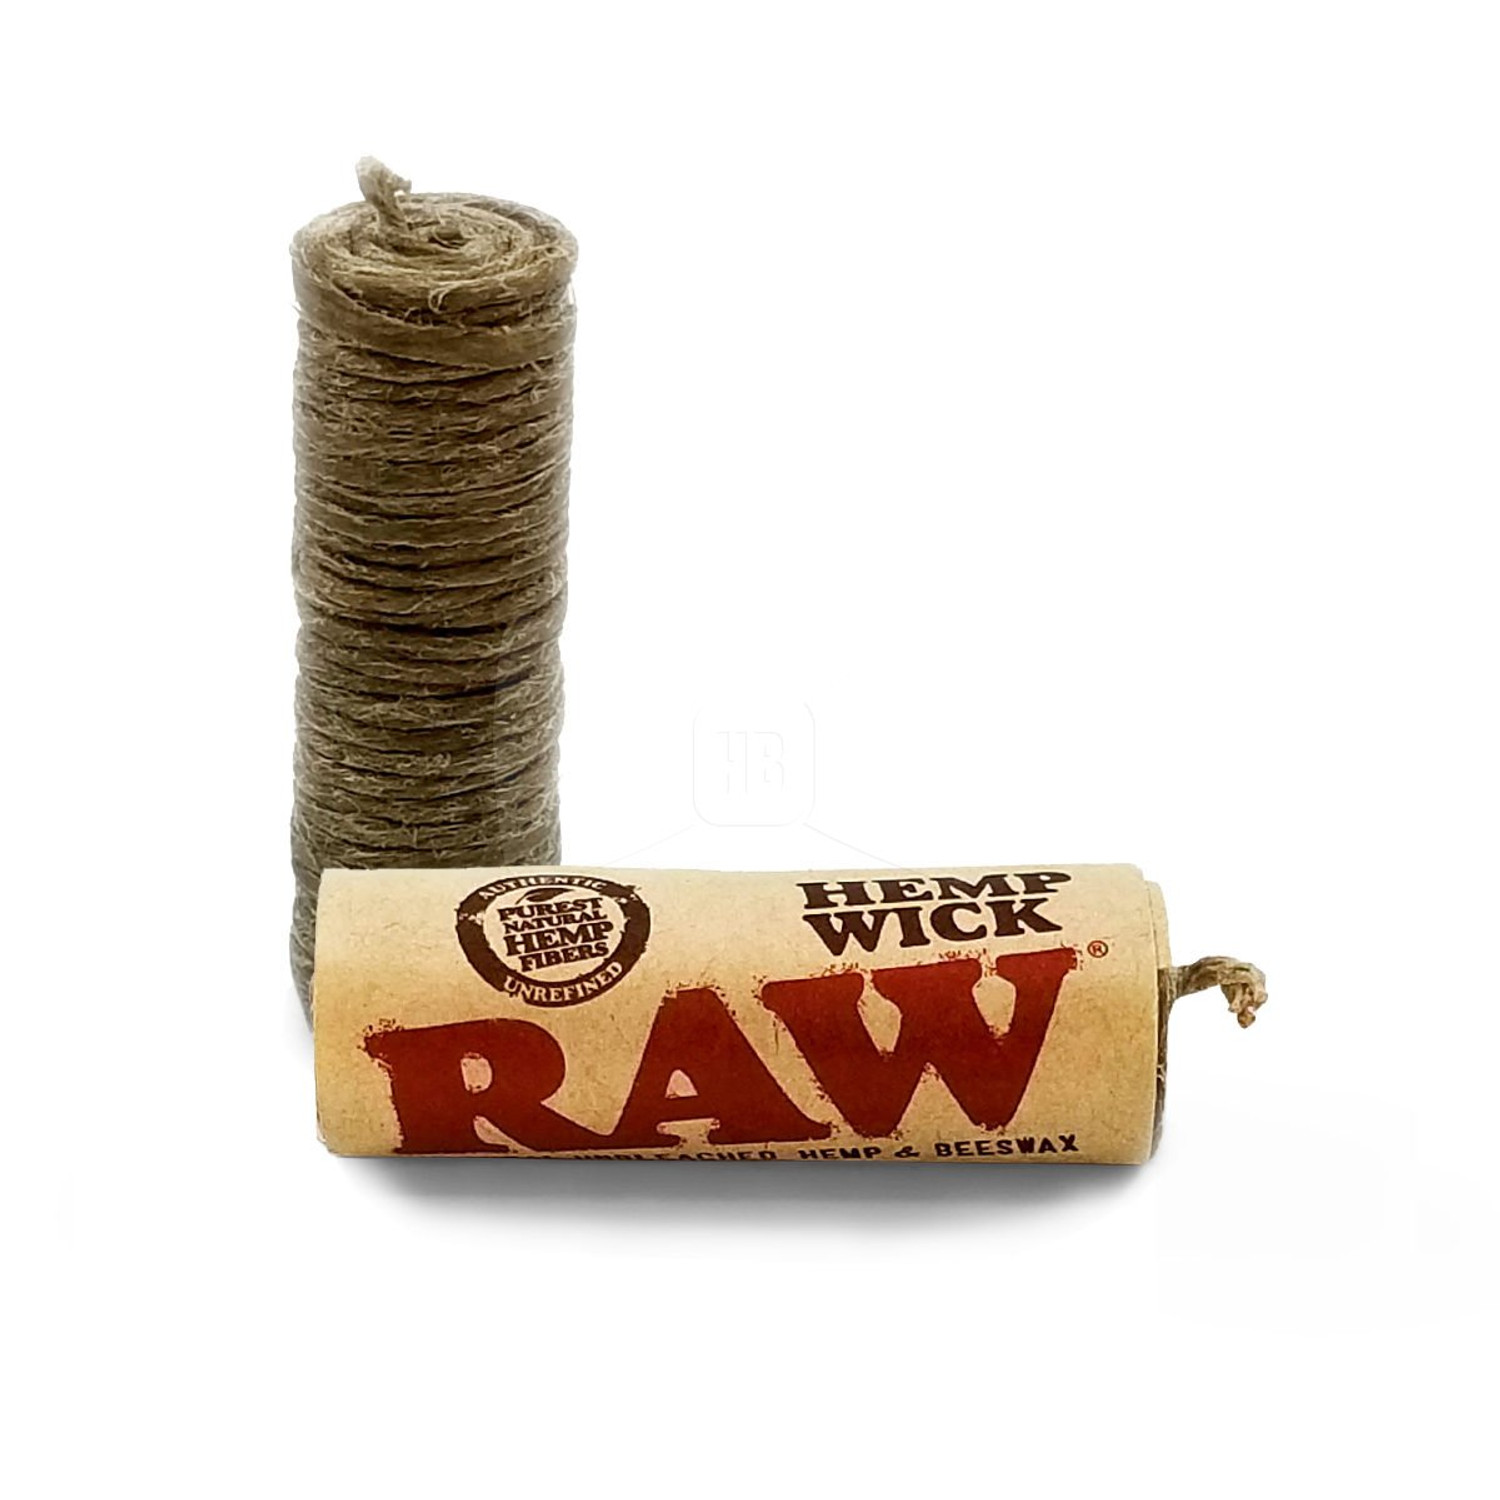 Best Prices For RAW - HEMP WICK 6 METER (20FT) ROLL - DISPLAY OF